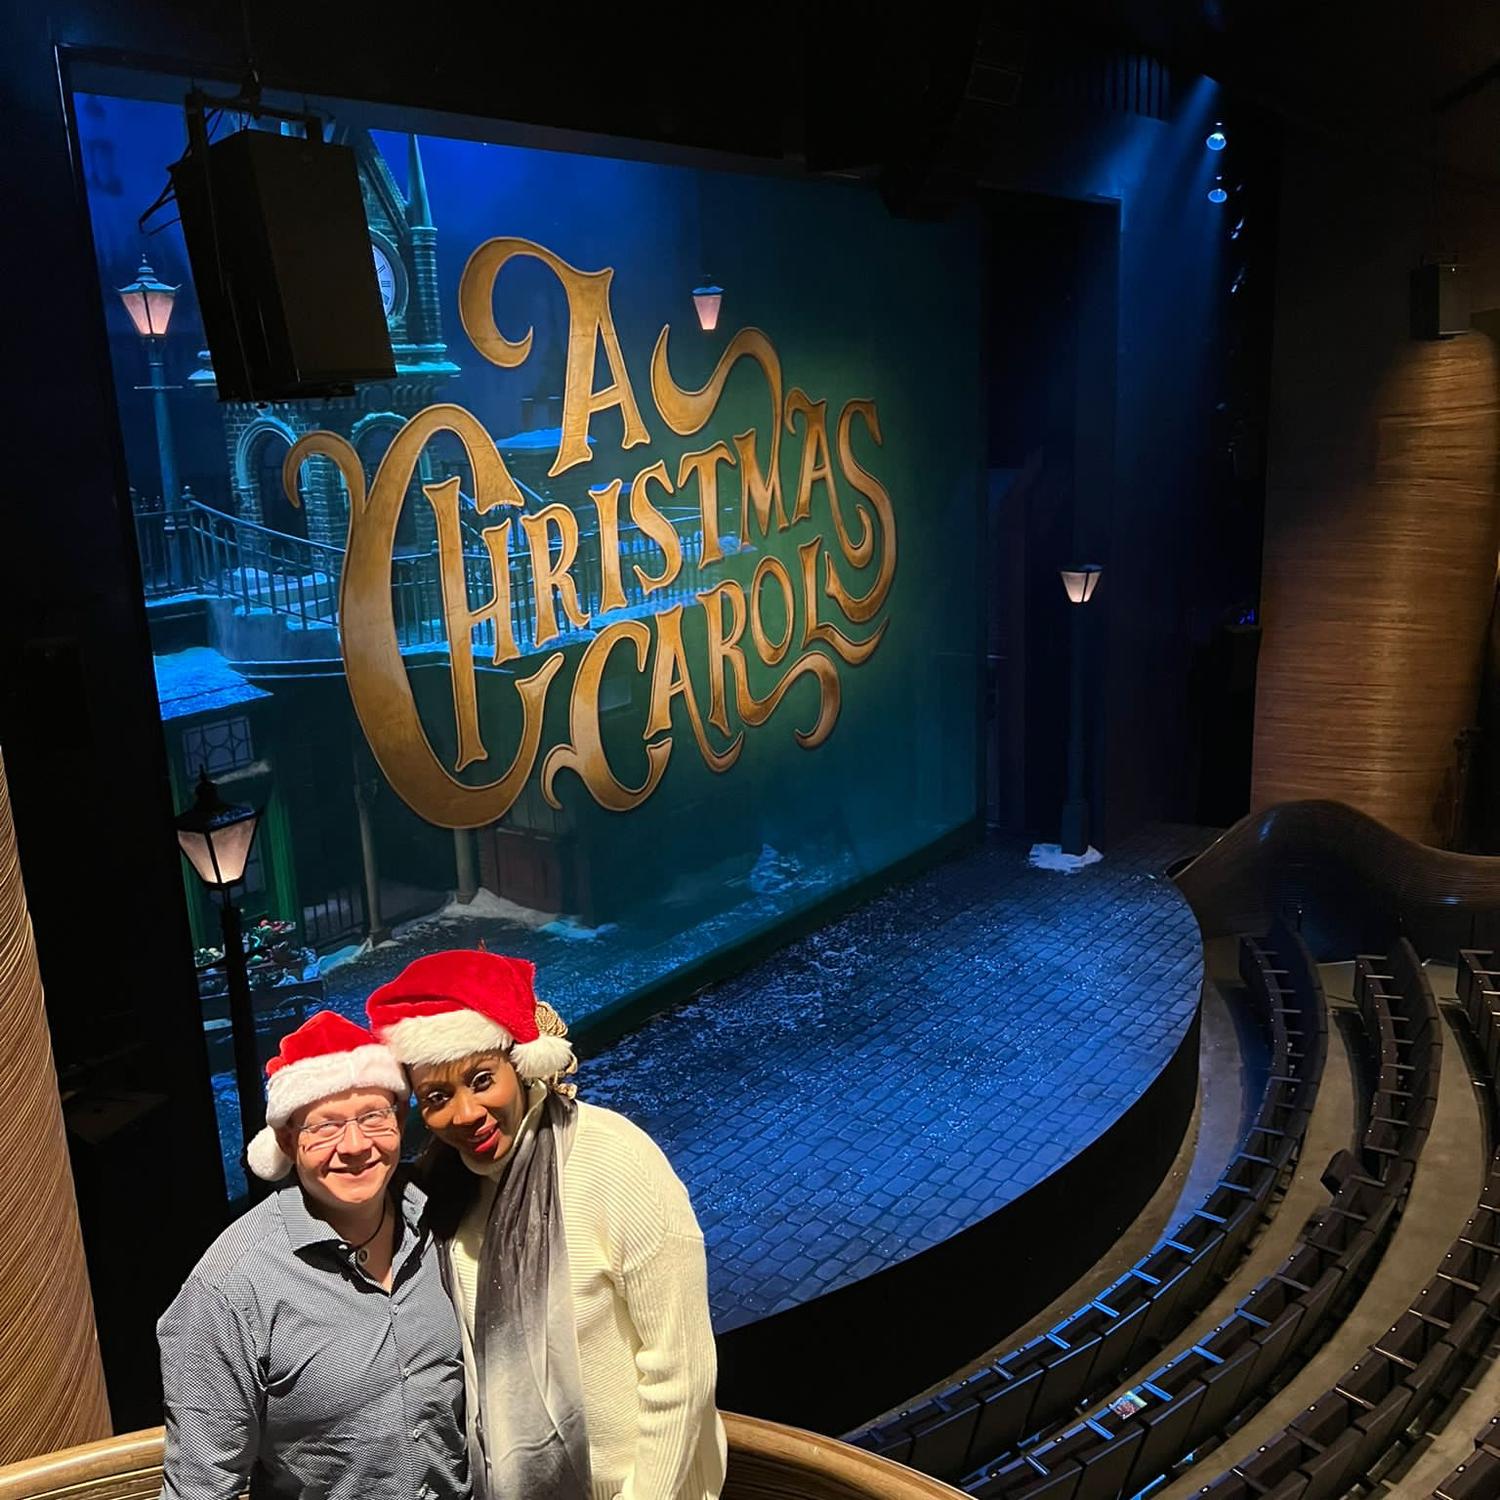 We went to watch the Play "A Christmas carol " at Alliance theatre Atlanta